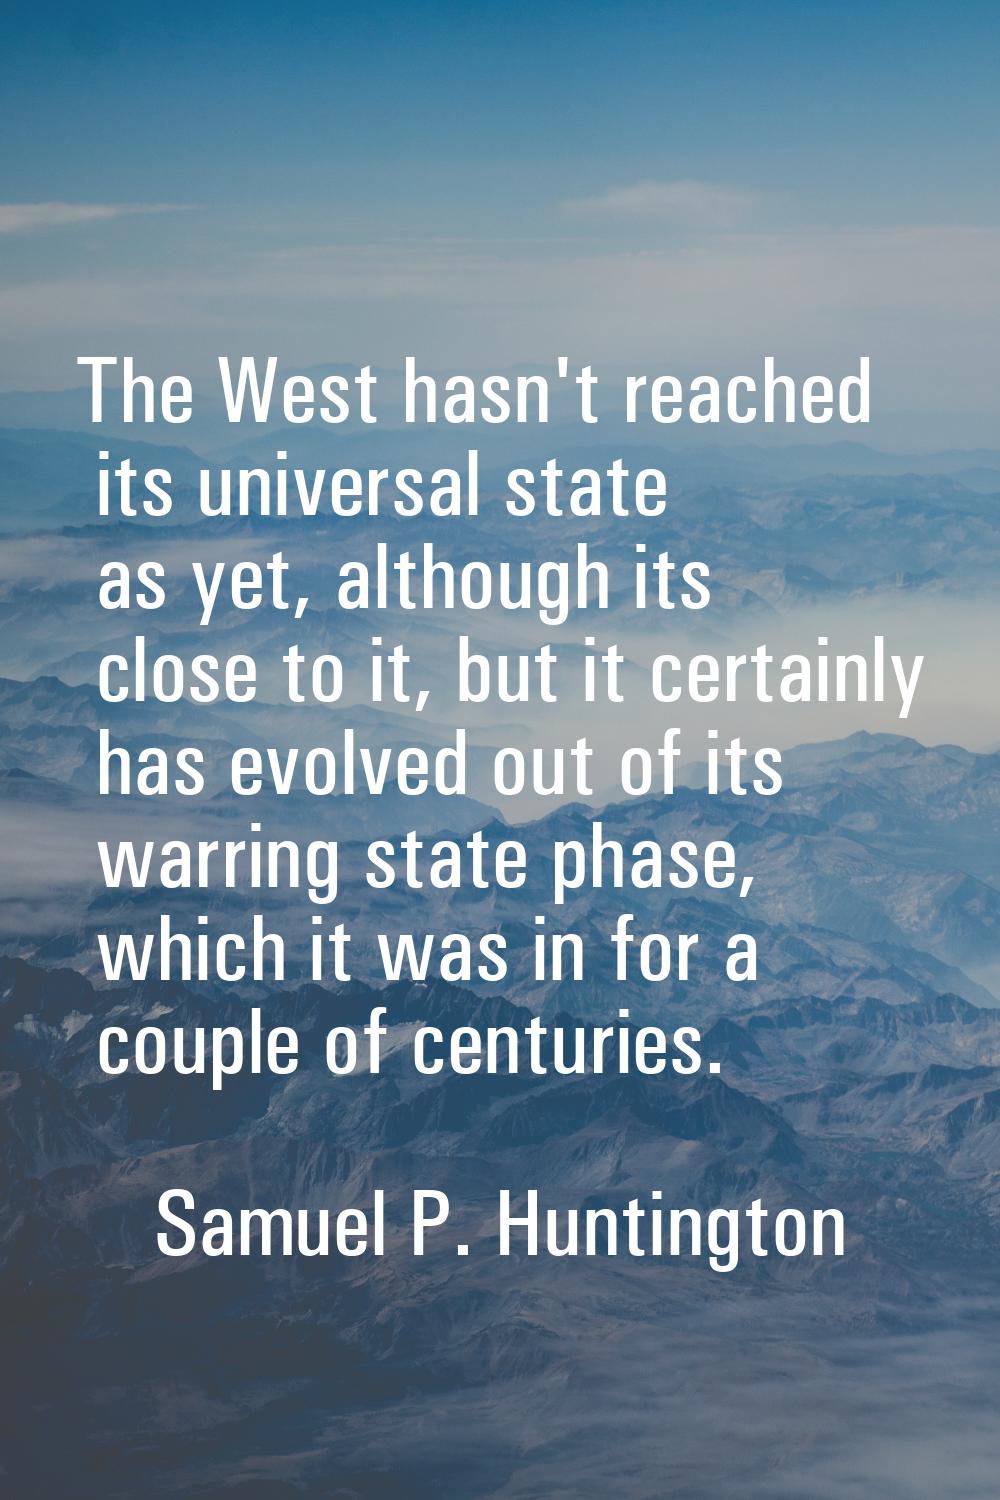 The West hasn't reached its universal state as yet, although its close to it, but it certainly has 